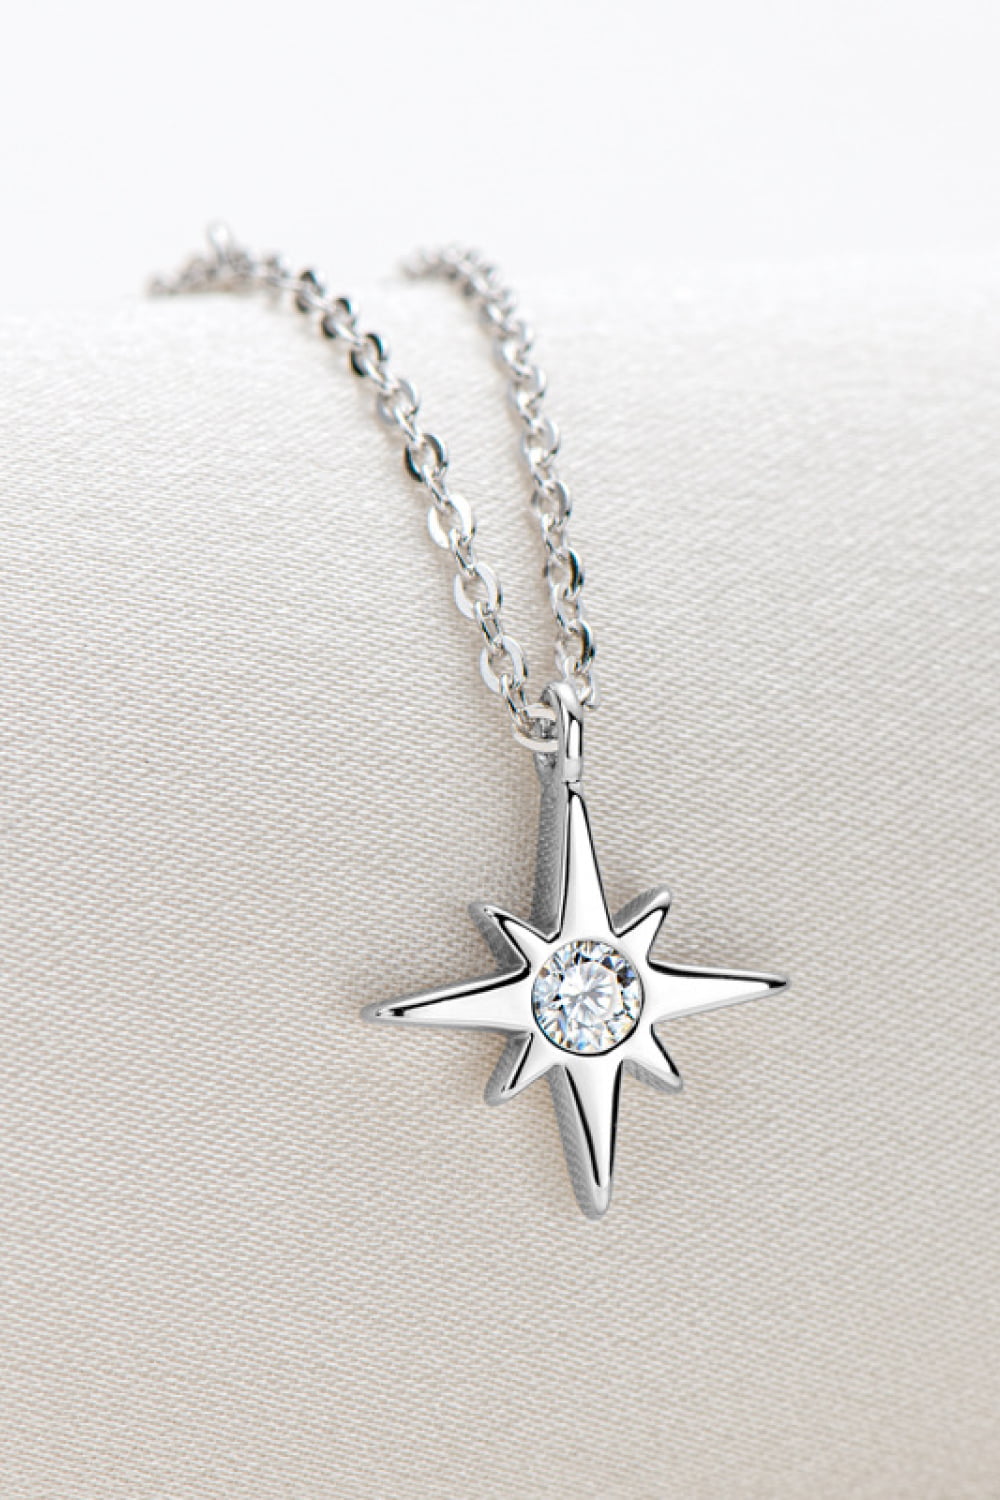 .2 Carat Moissanite North Star Pendant 925 Sterling Silver Necklace